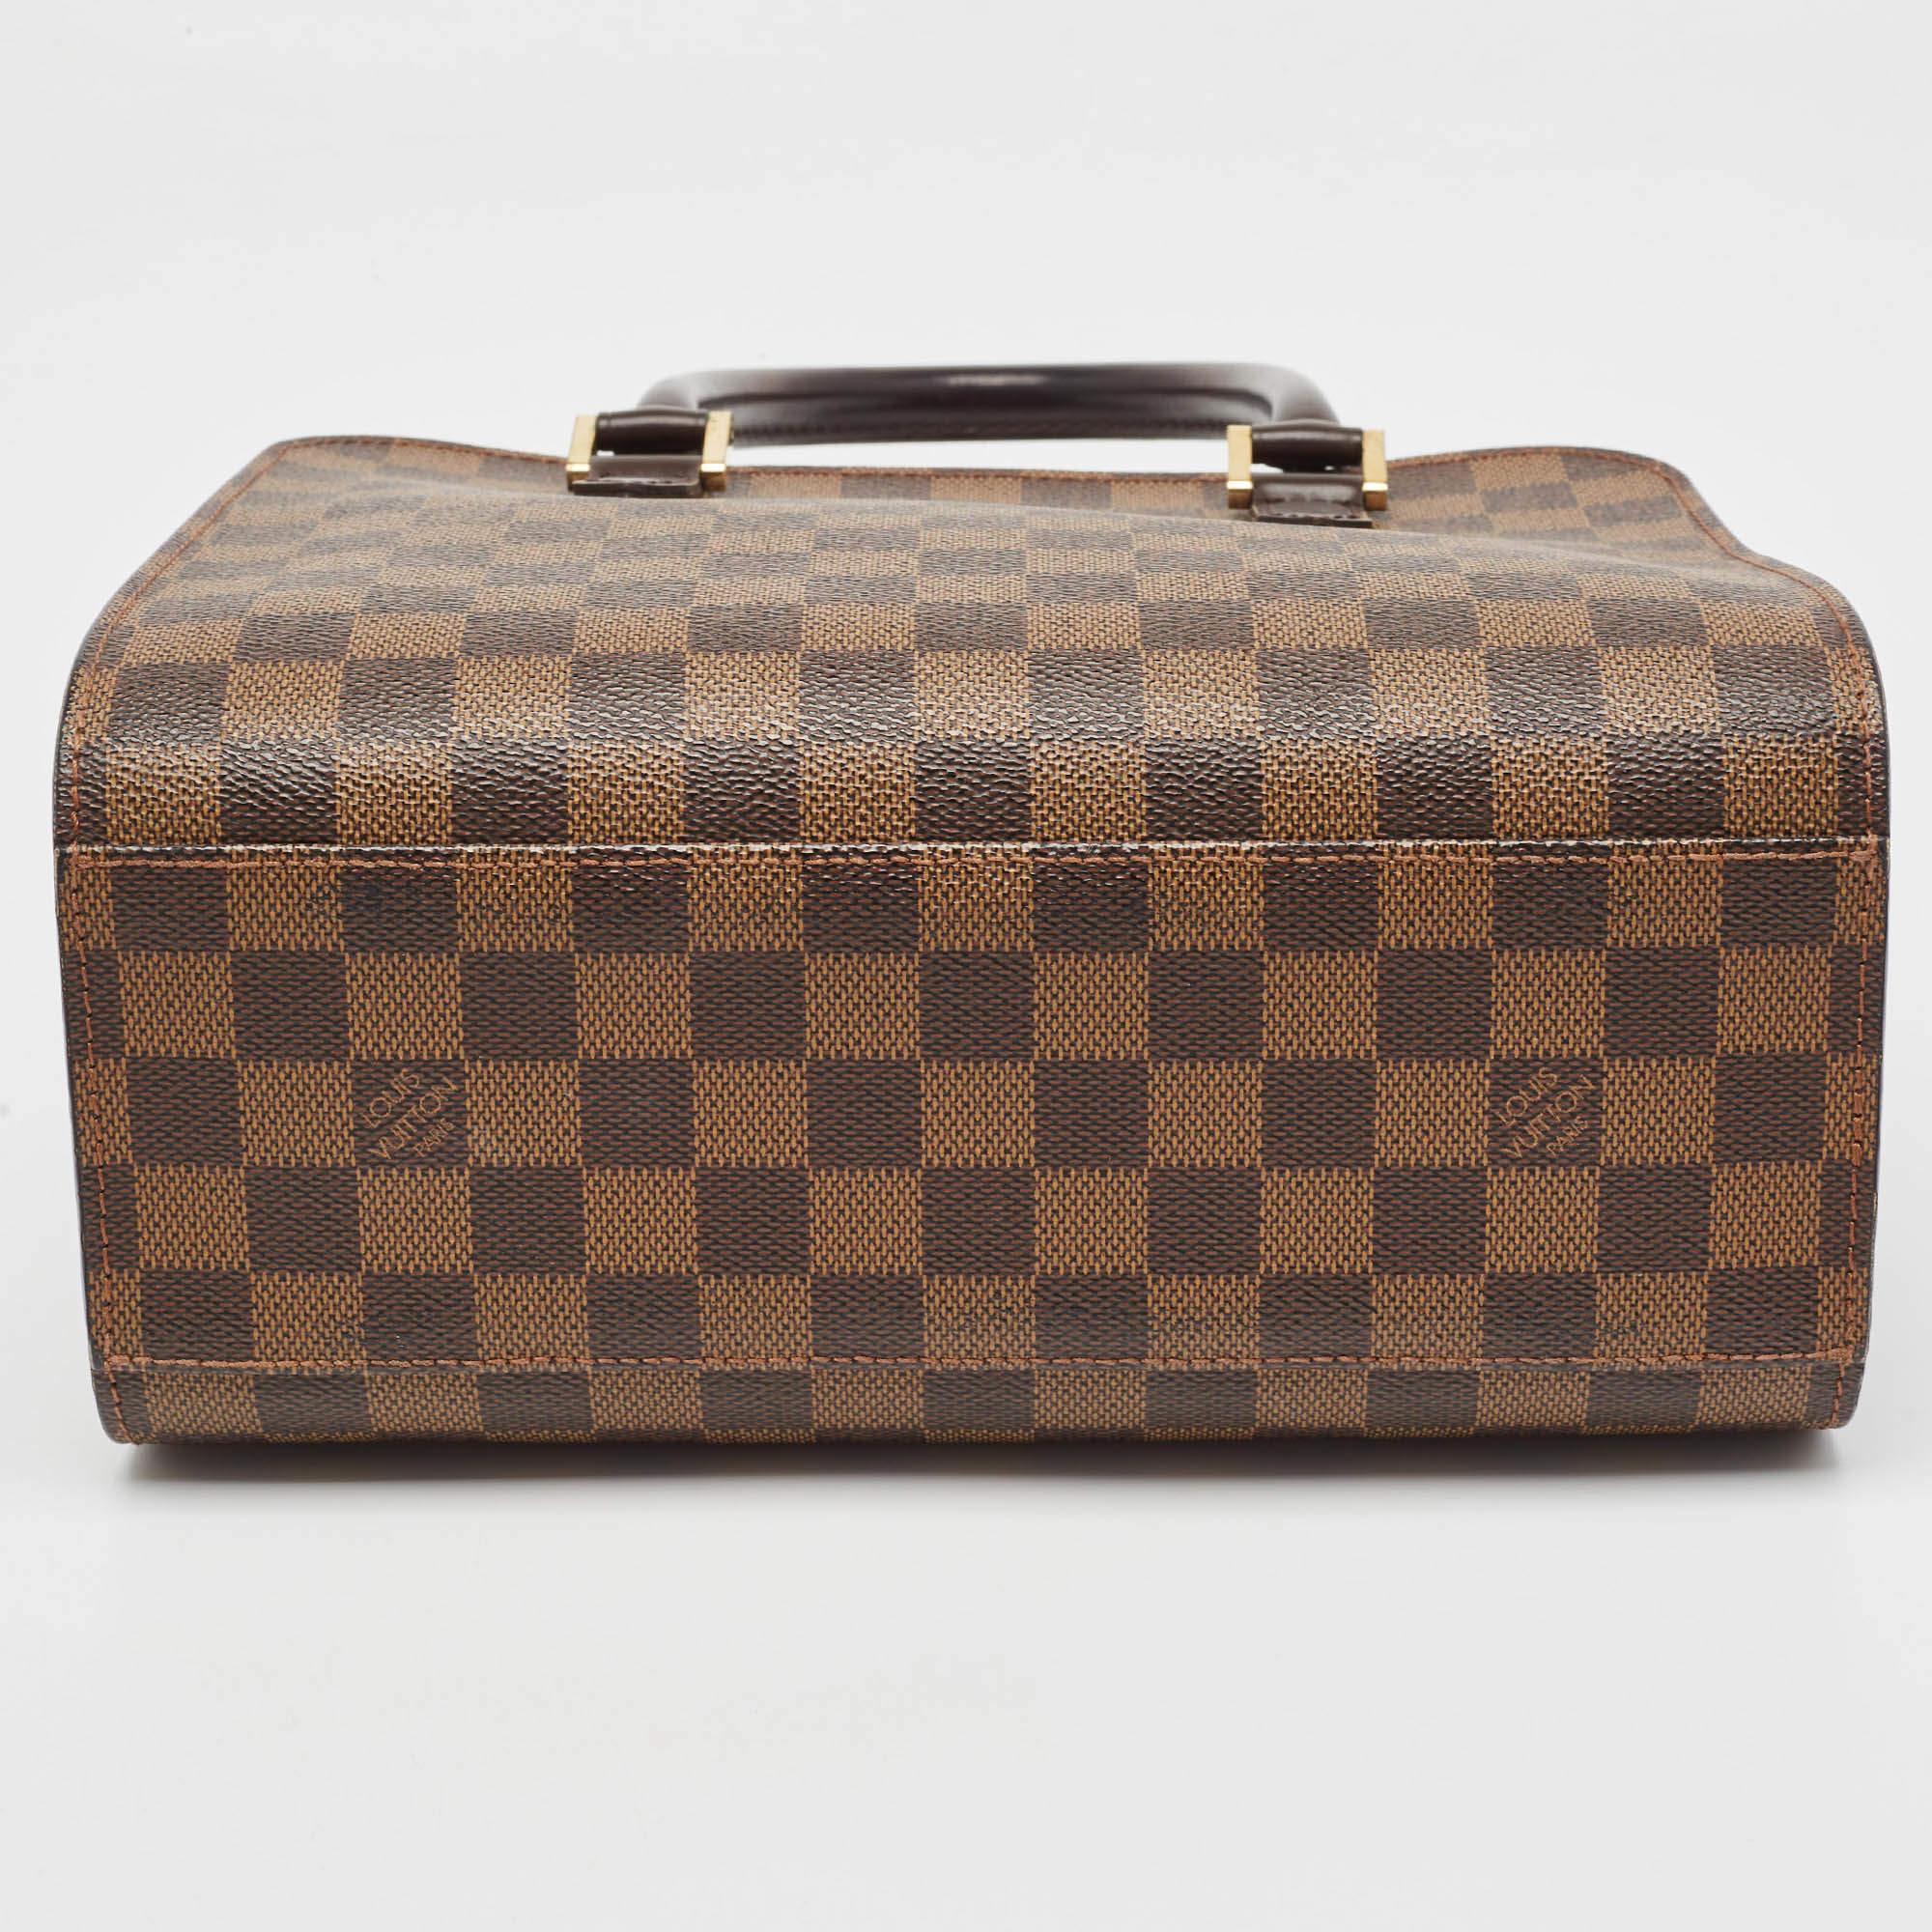 Louis Vuitton Damier Ebene Canvas and Leather Triana Bag 2